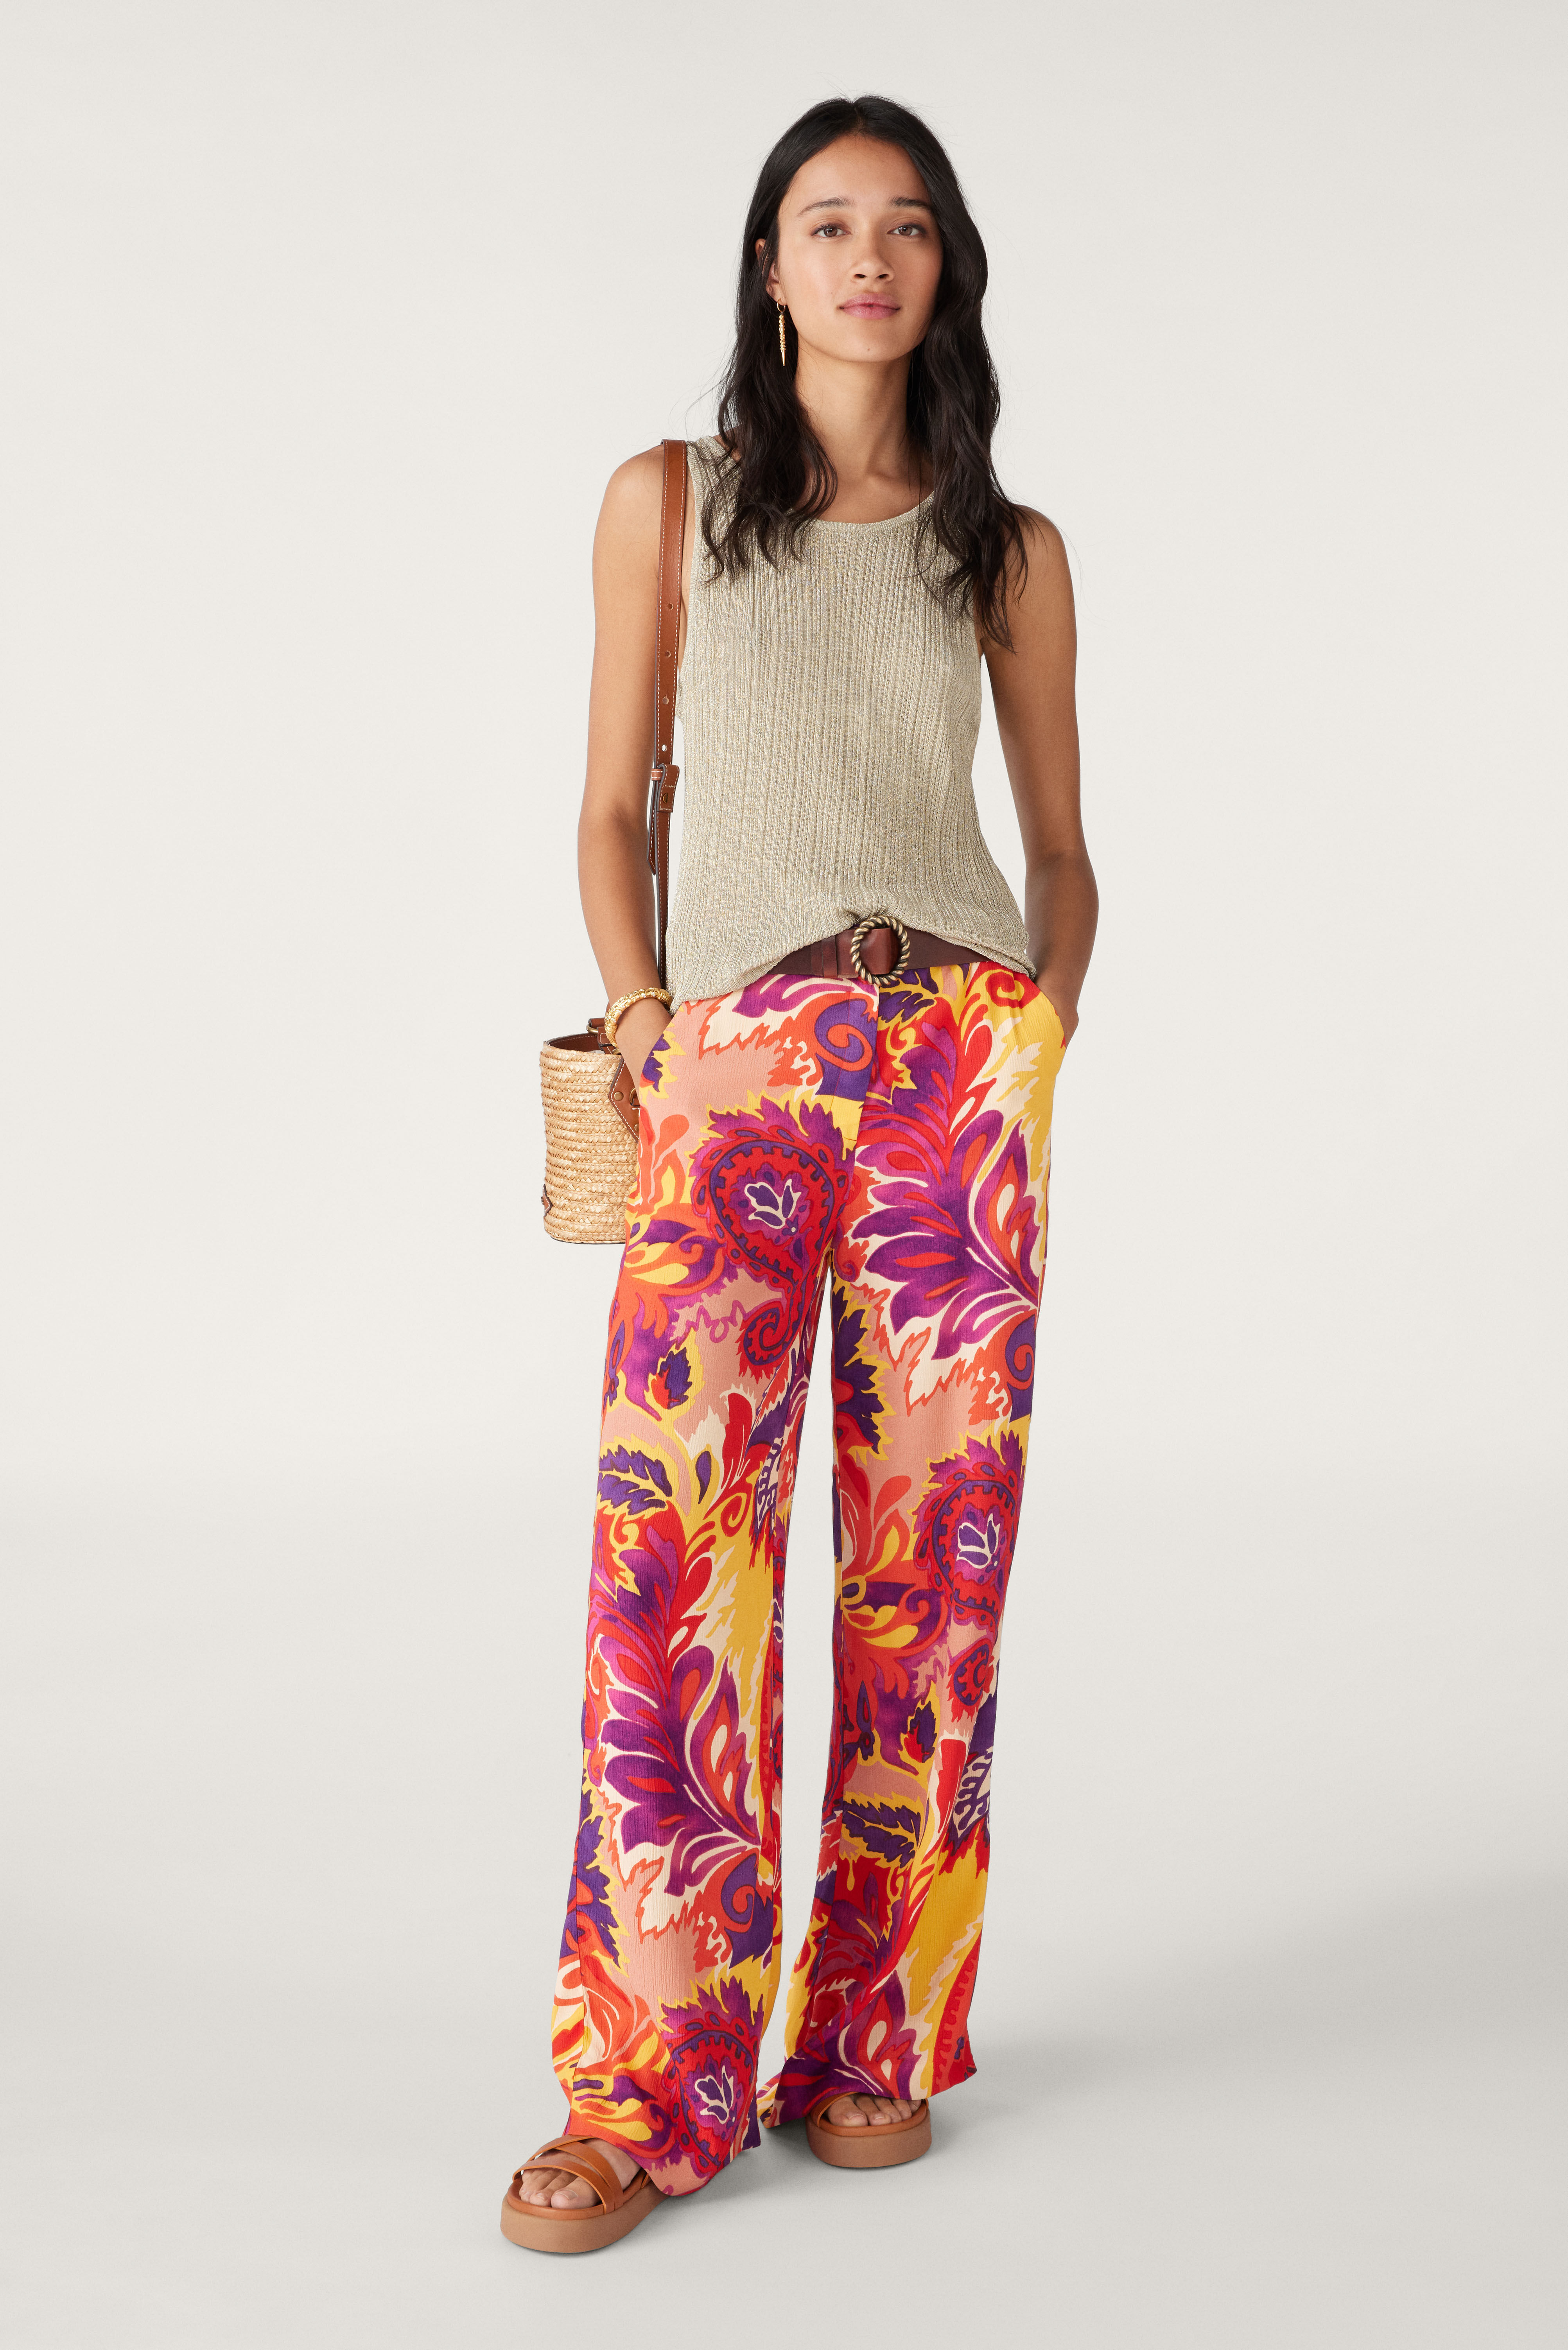 Oui Paisley Print Wide Leg Trousers - Trousers from Shirt Sleeves UK